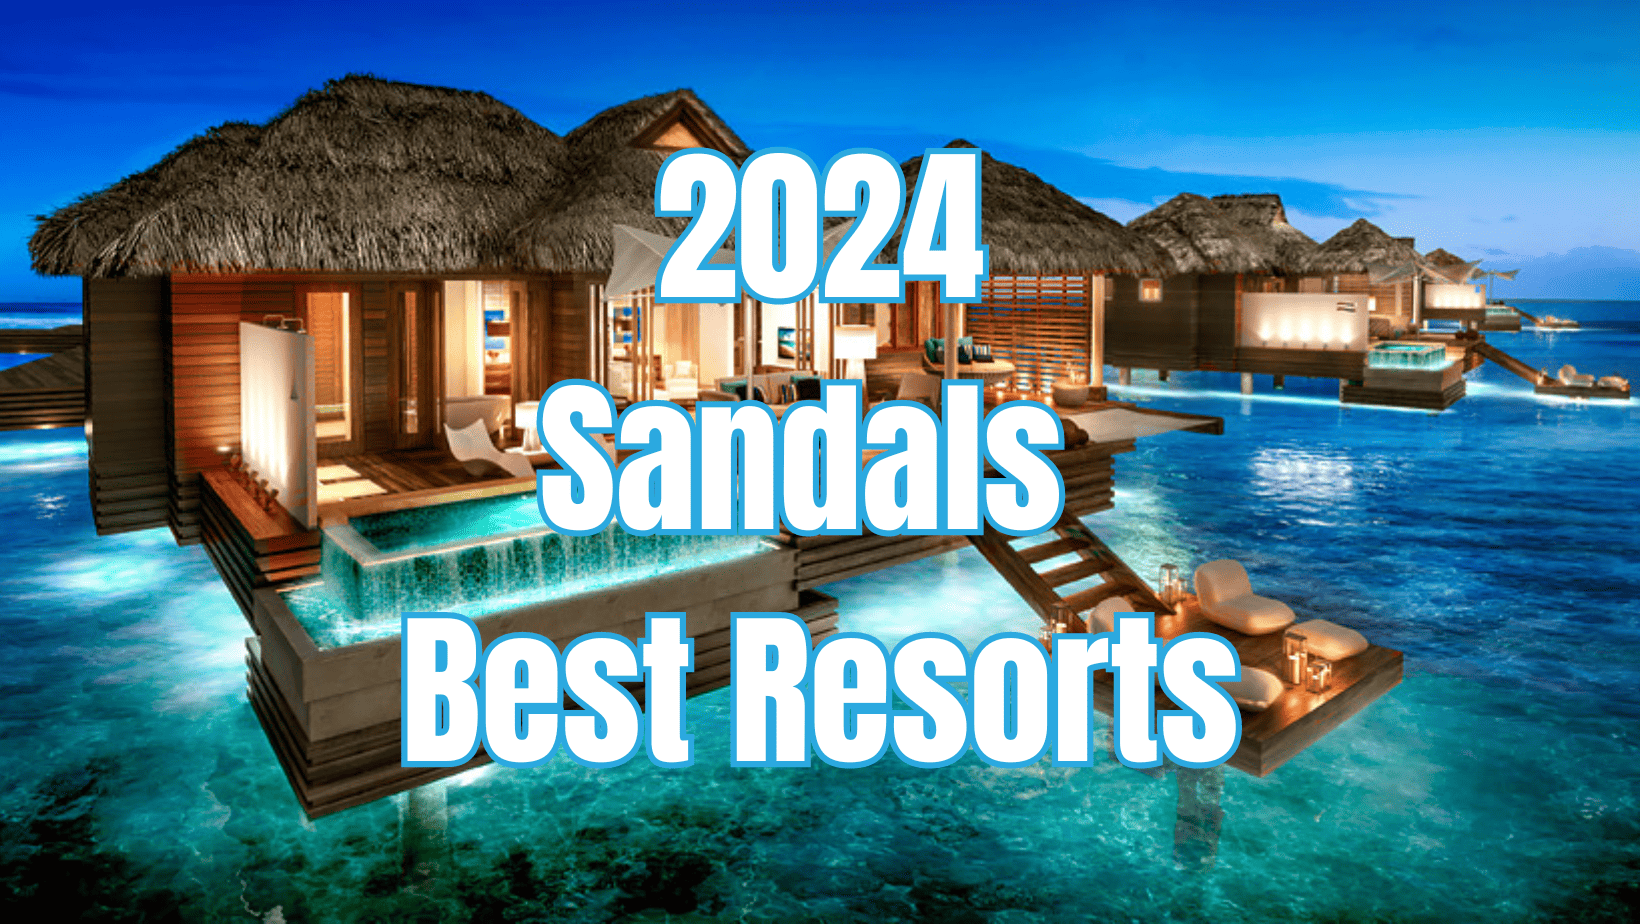 Best Pool: Sandals Resorts | Top Swimming Pools at Sandals - YouTube